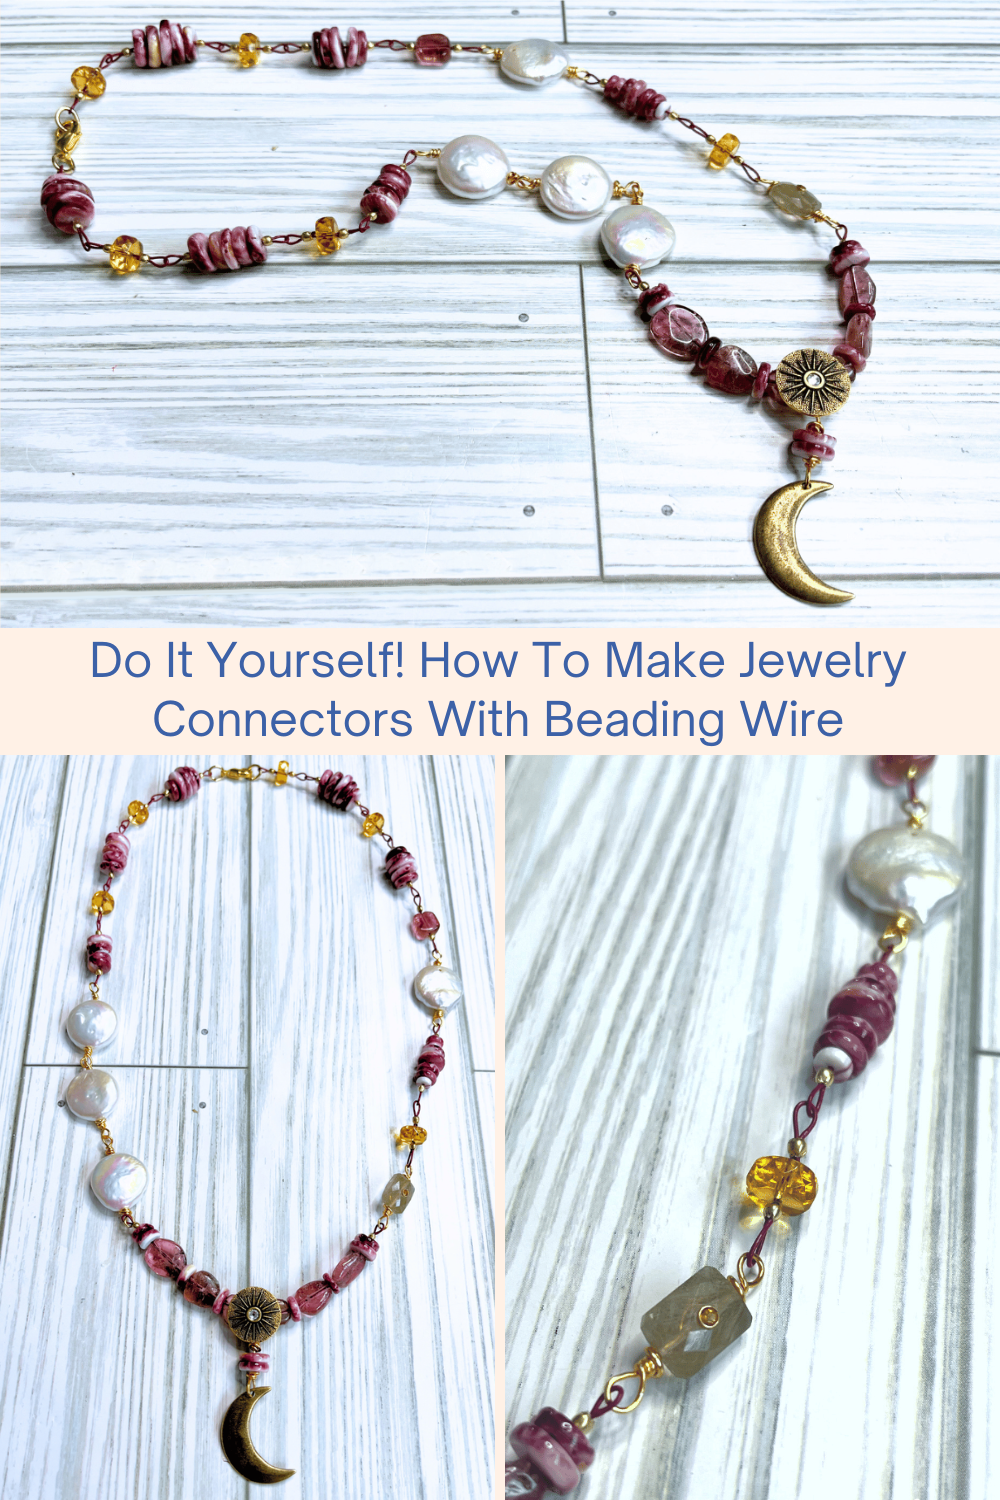 Do It Yourself! How To Make Jewelry Connectors With Beading Wire